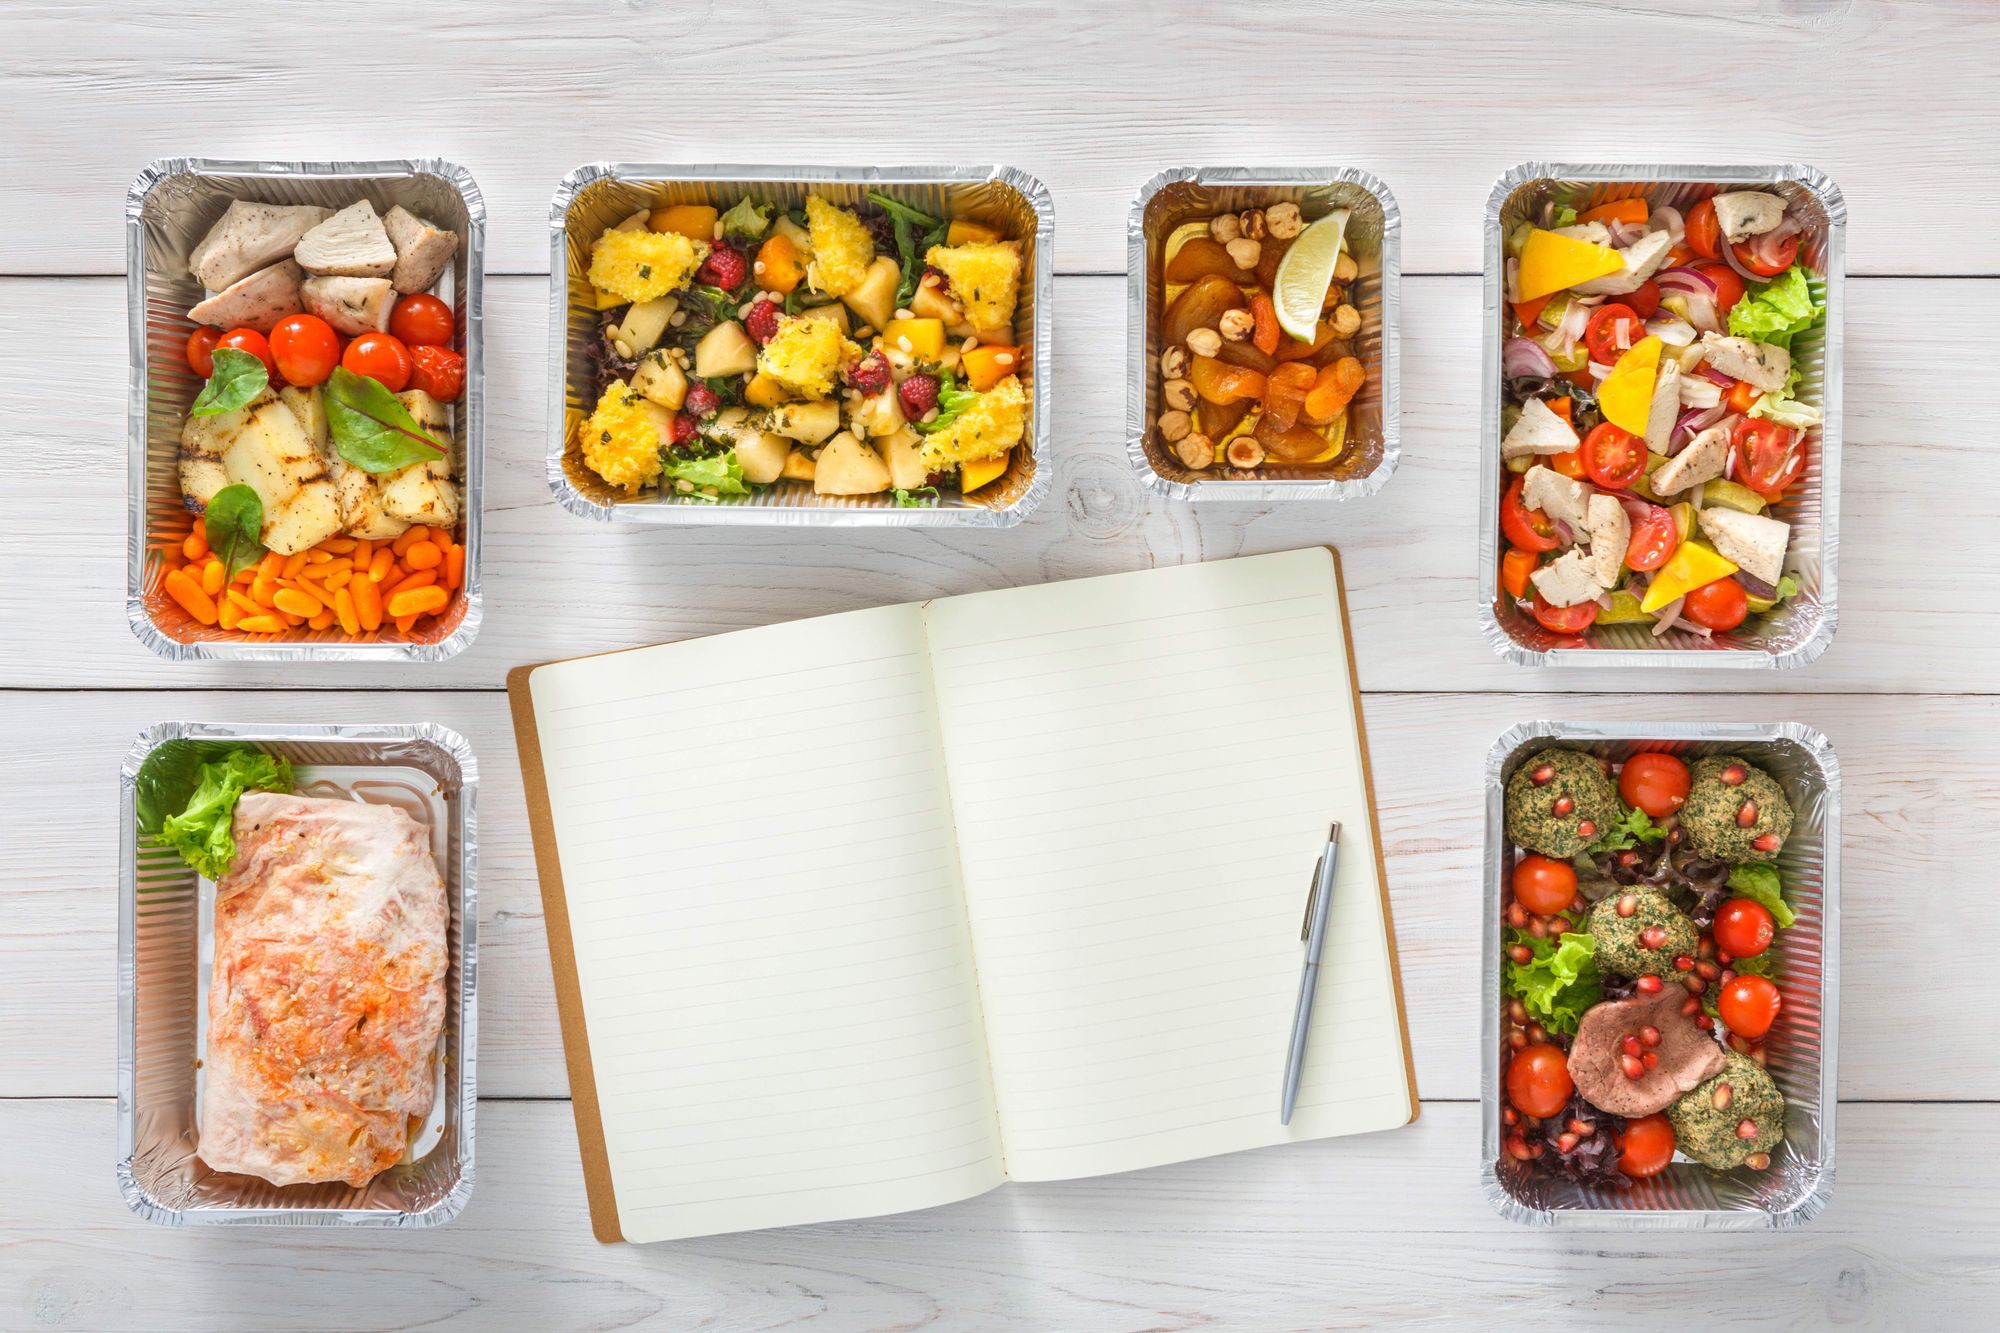 Six menu items in aluminum containers around a notebook and a pen.